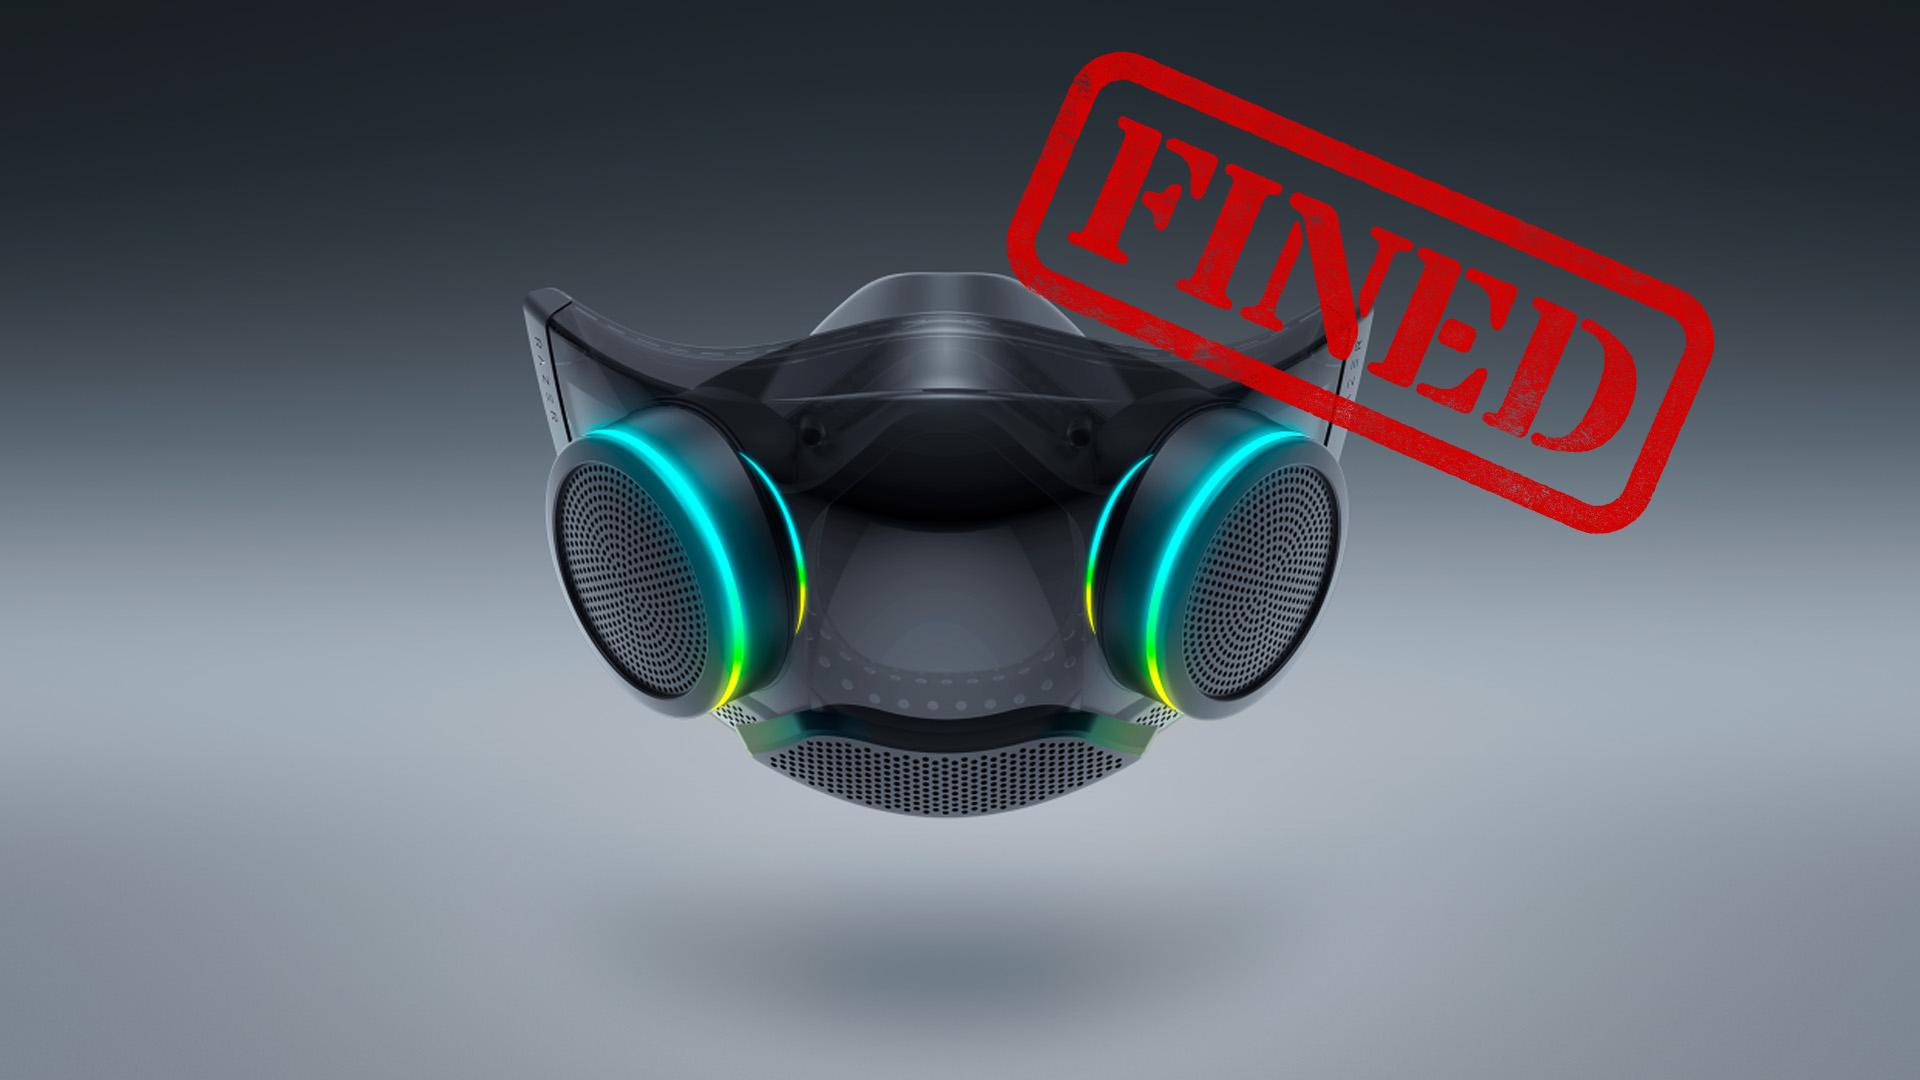 Razer's N95 face mask didn't work and just cost the company over $1M